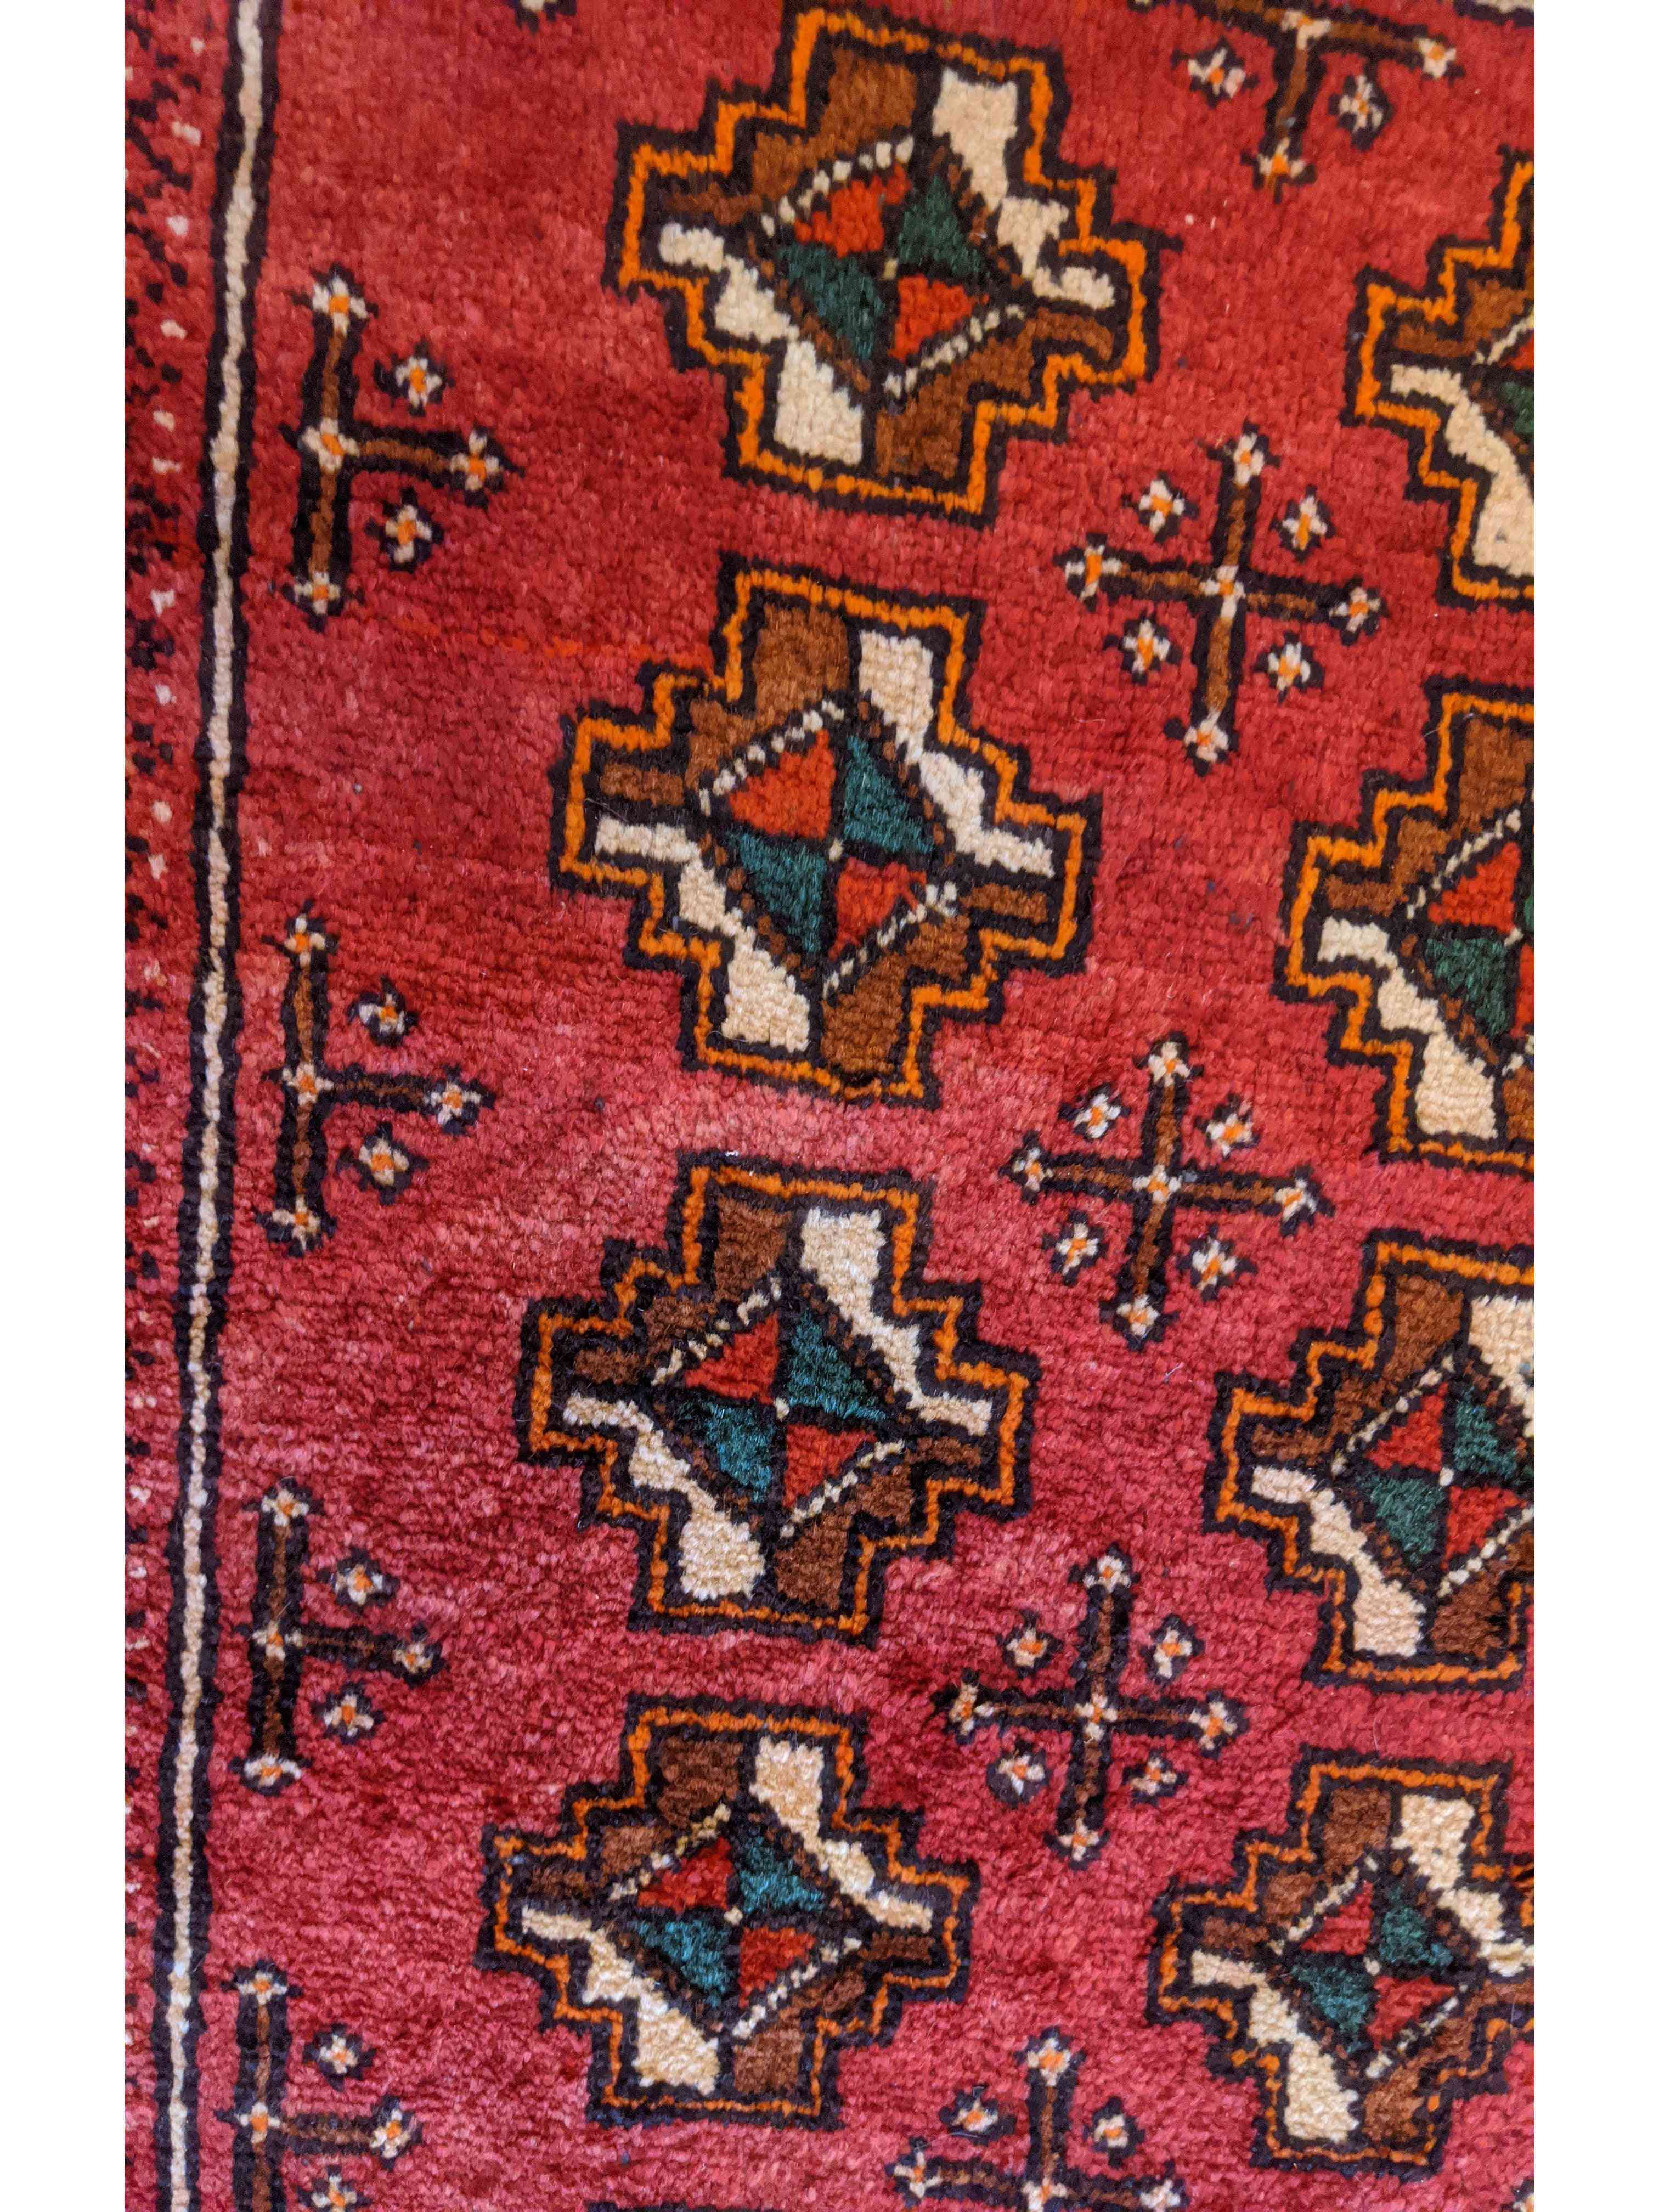 240 x 102 cm Persian Baluch Traditional Red Rug - Rugmaster